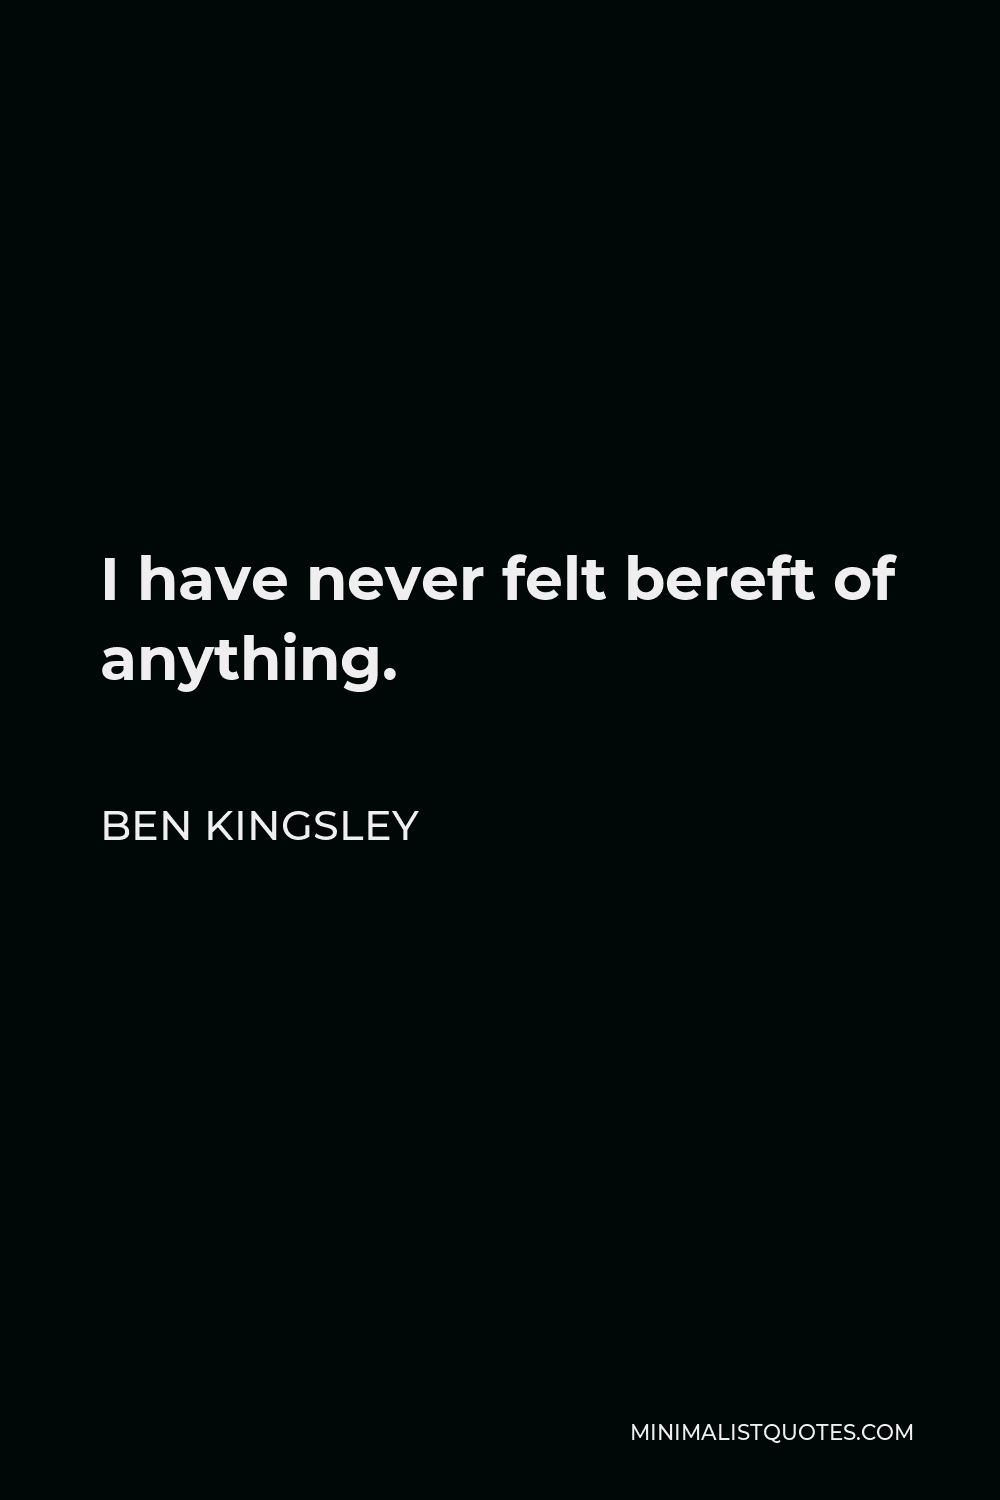 Ben Kingsley Quote - I have never felt bereft of anything.